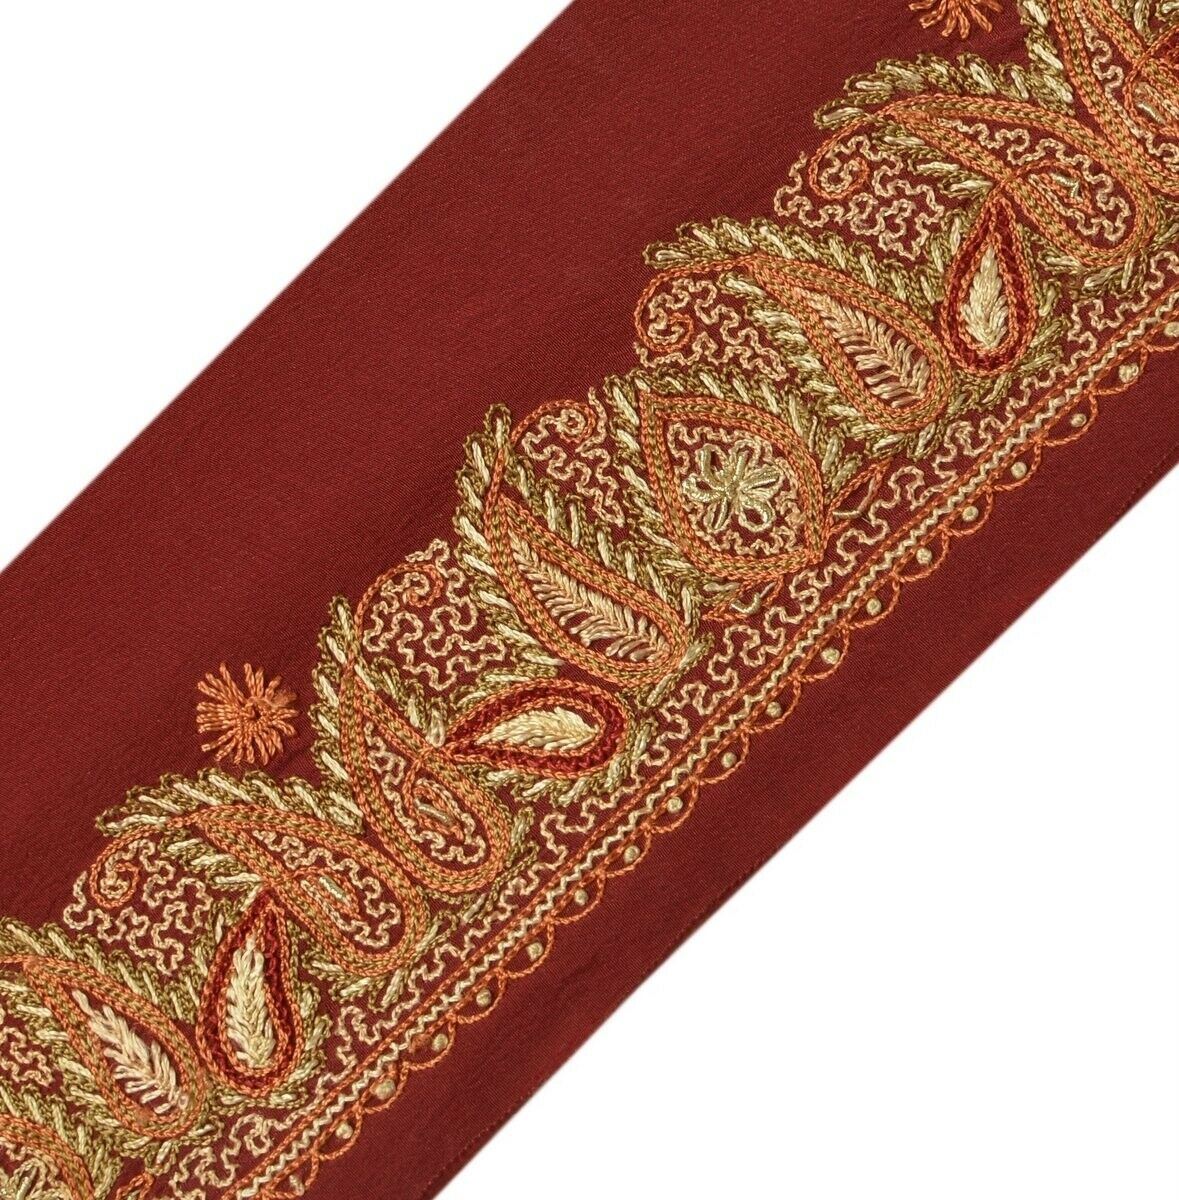 Vintage Sari Border Indian Craft Trim Hand Embroidered Beaded Ribbon Lace Maroon